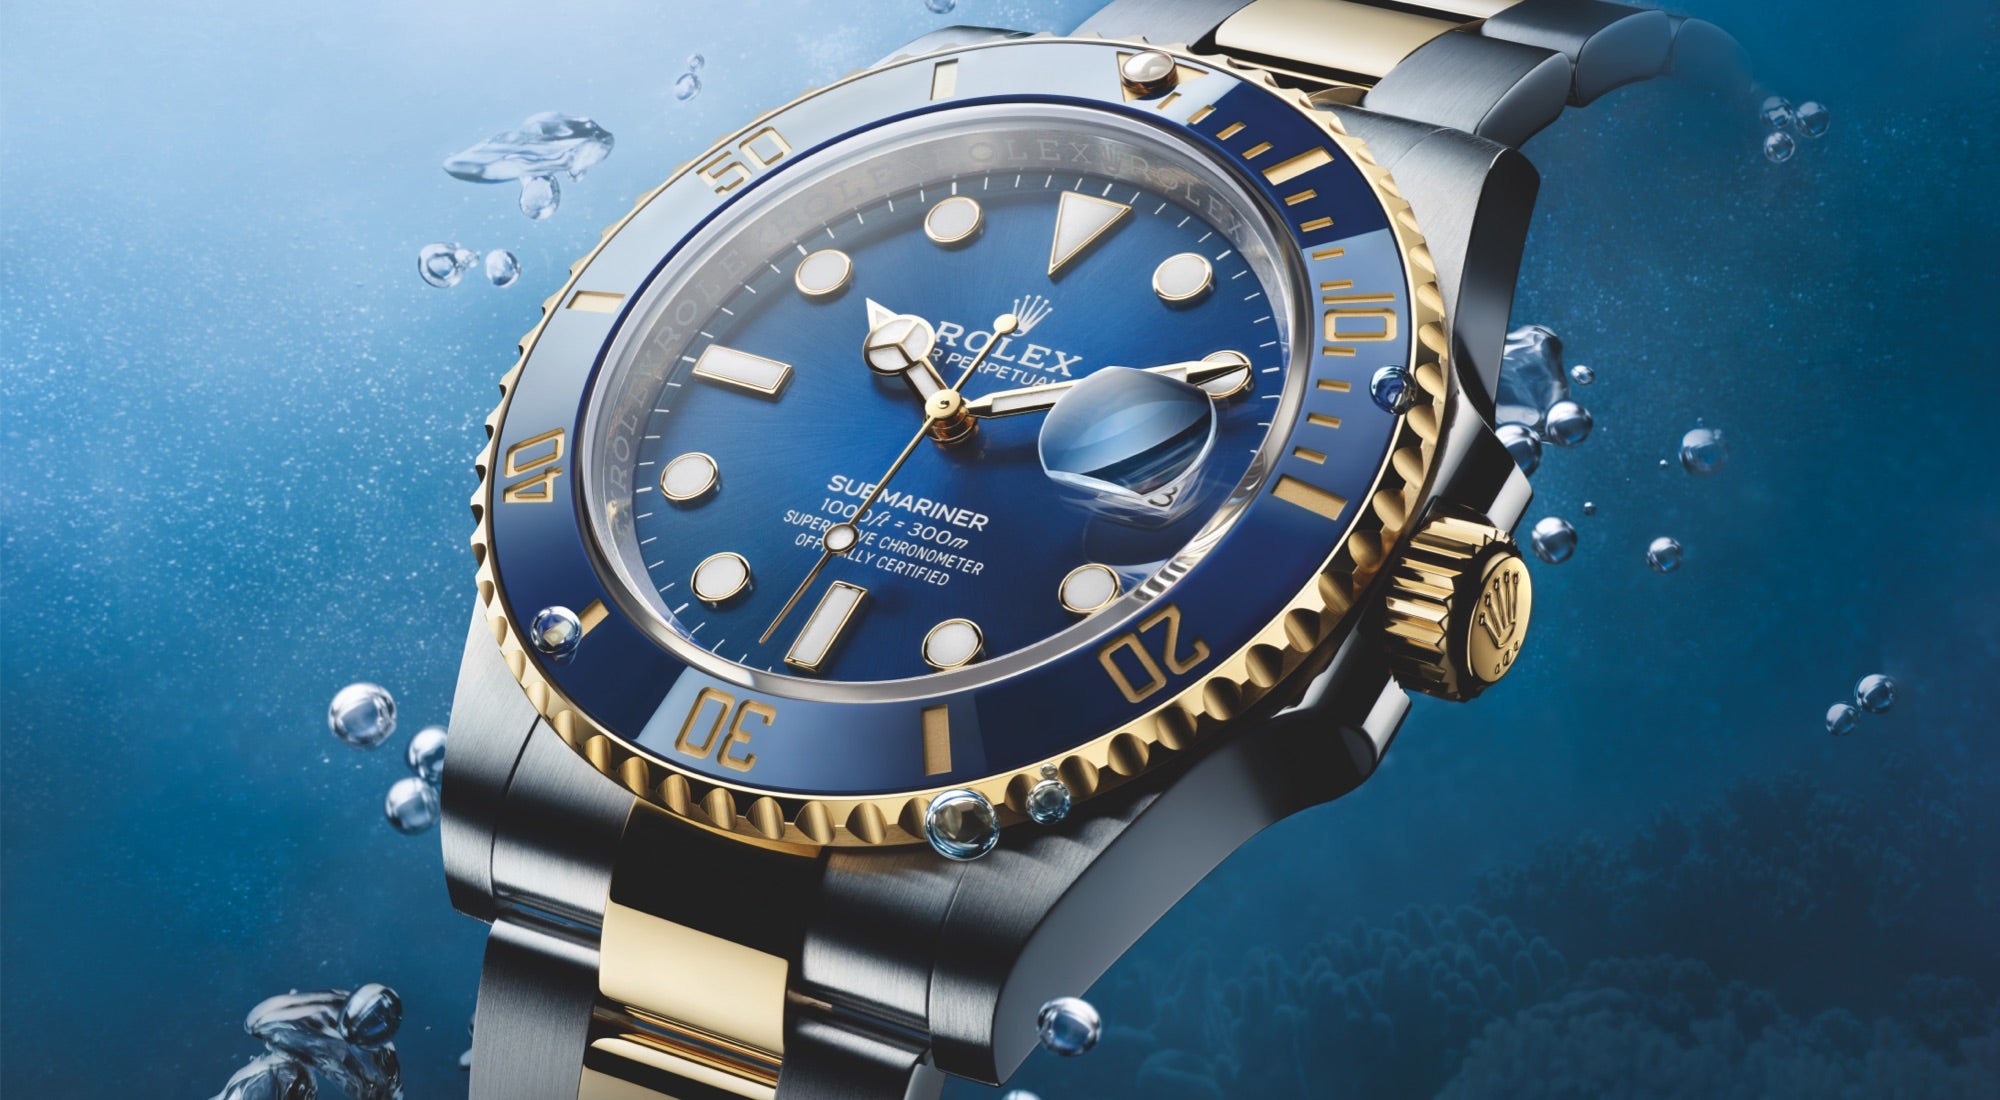 rolex submariner watches - deacons jewellers